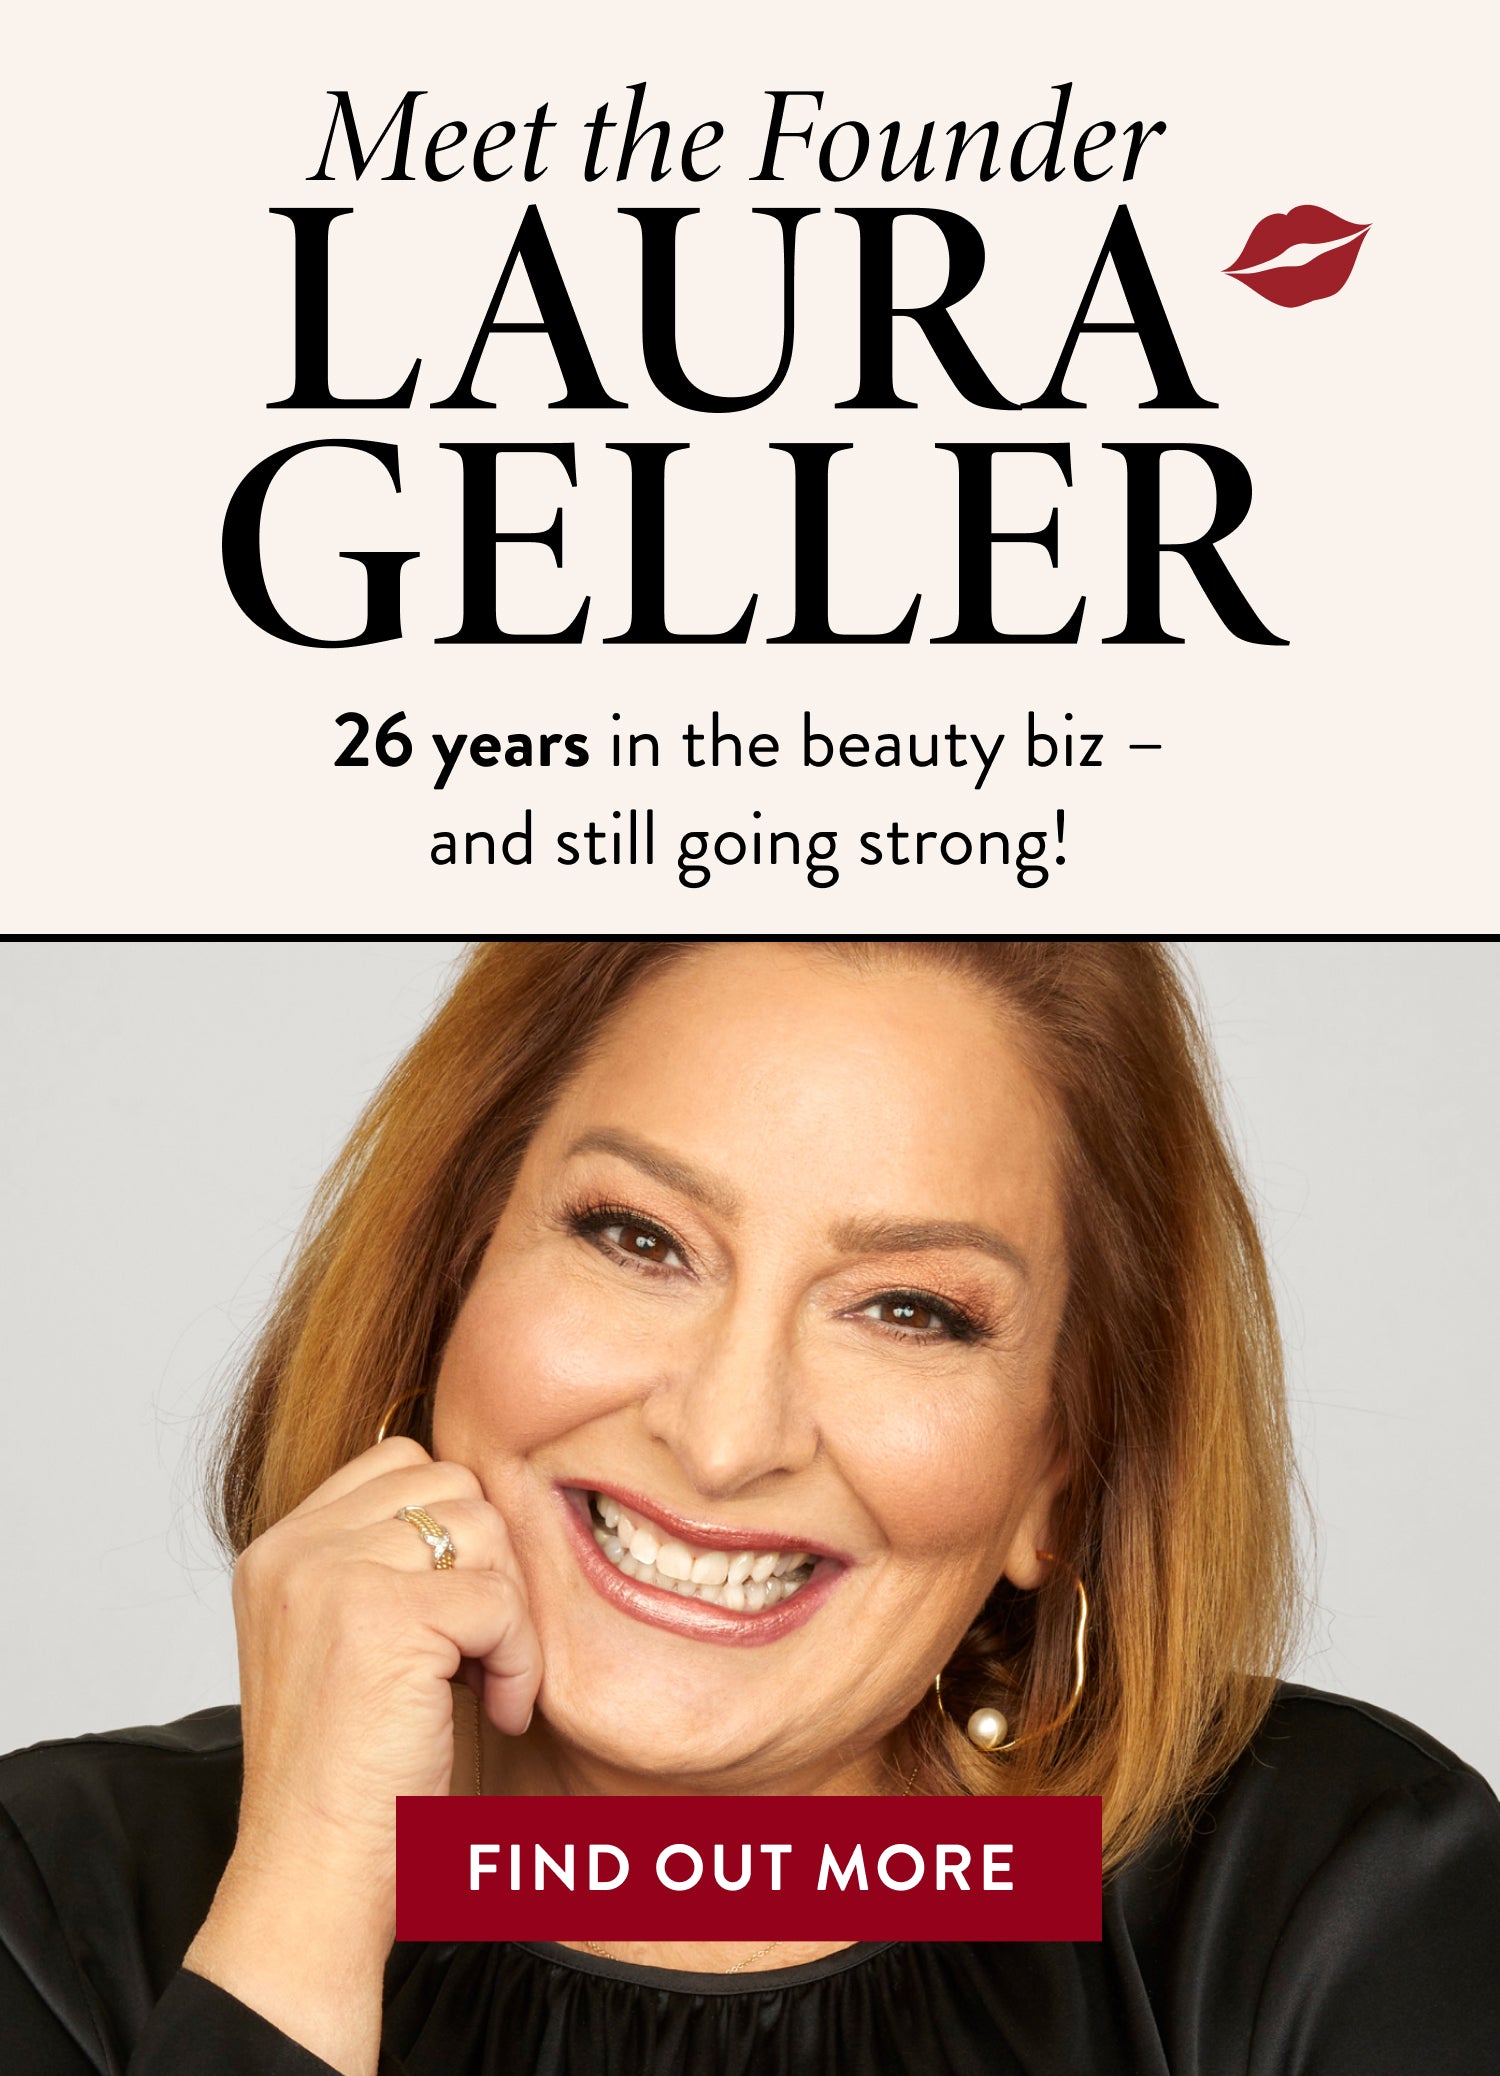 Meet the Founder, Laura Geller. 26 years in the beauty biz- and still going strong!